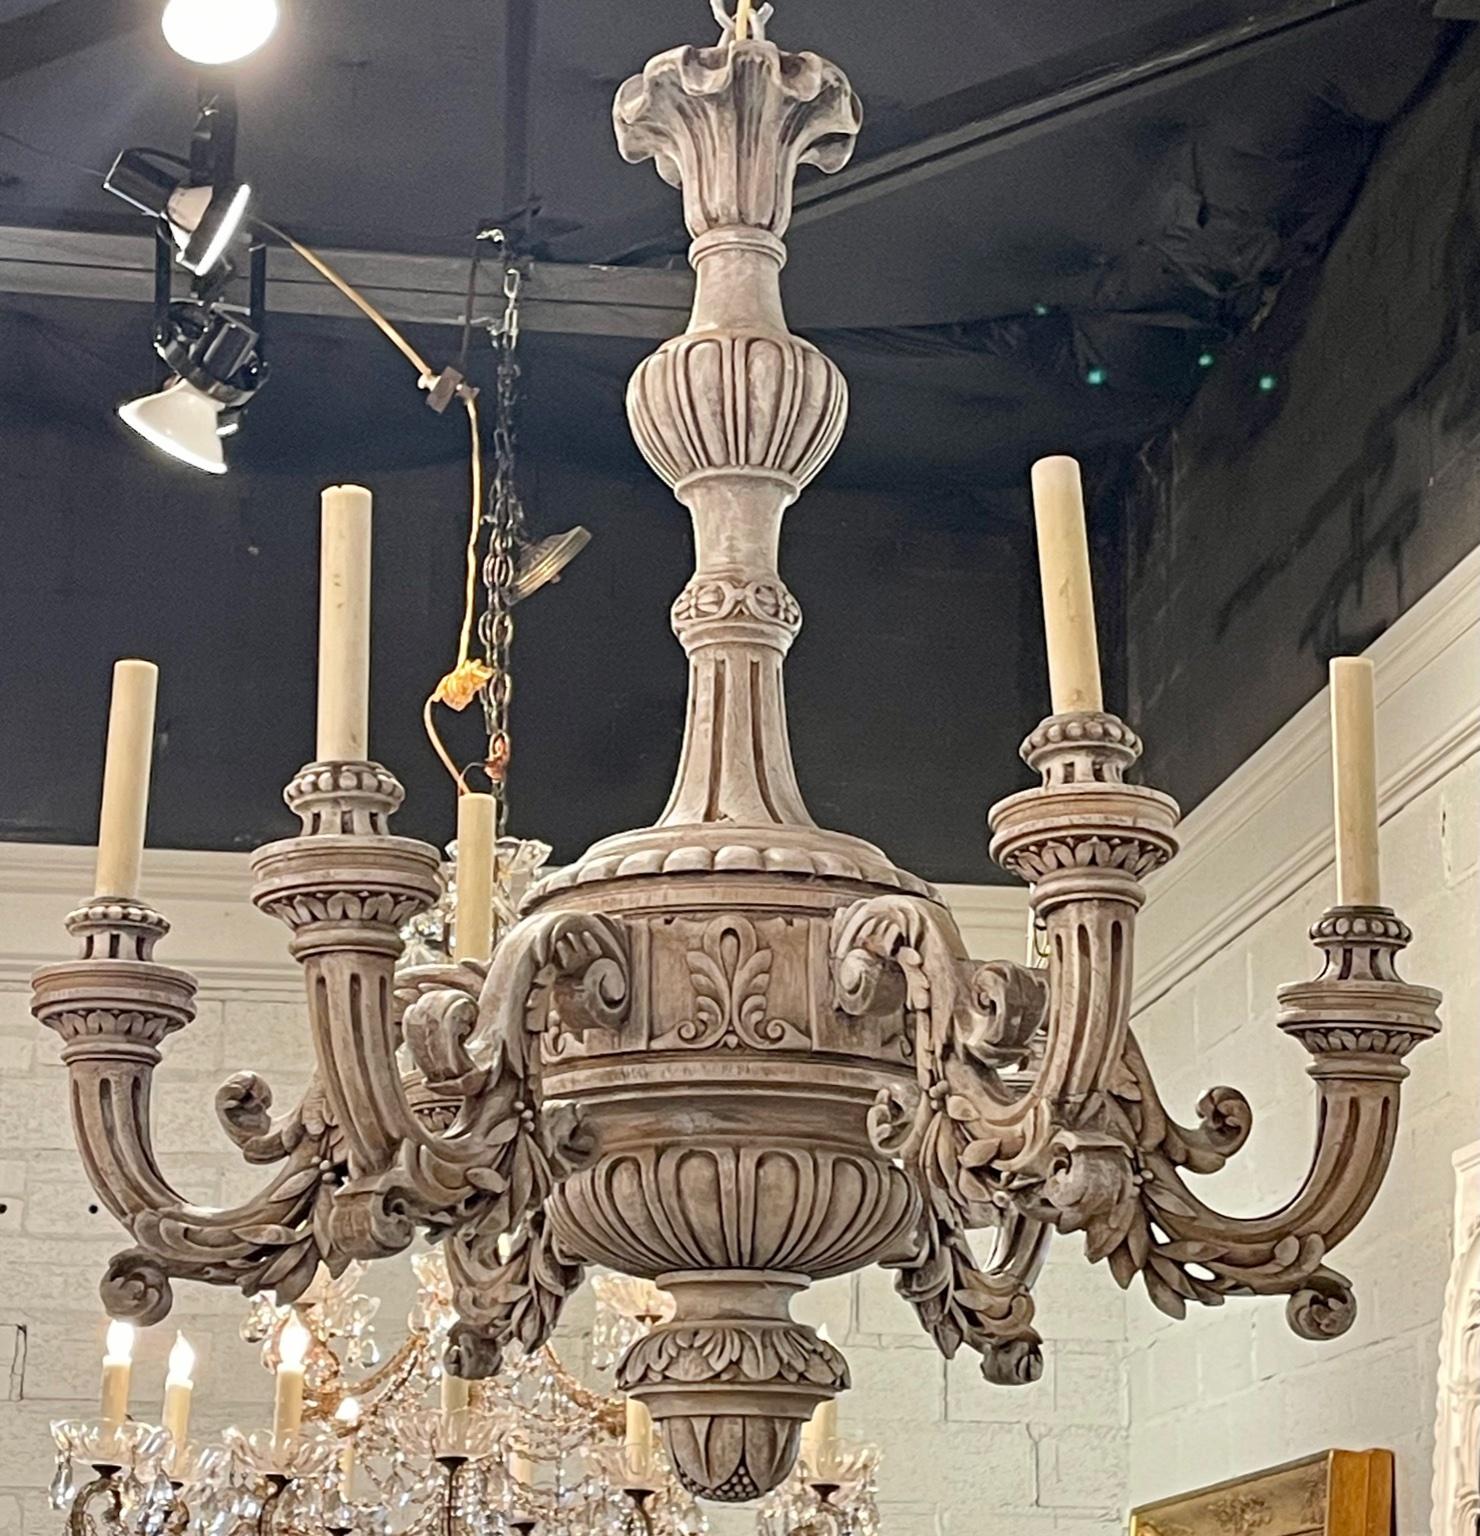 19th century French carved white washed oak 6-light chandelier, Circa 1880. The chandelier has been professionally re-wired, cleaned and is ready to hang. Includes matching chain and canopy. The perfect addition to any home.